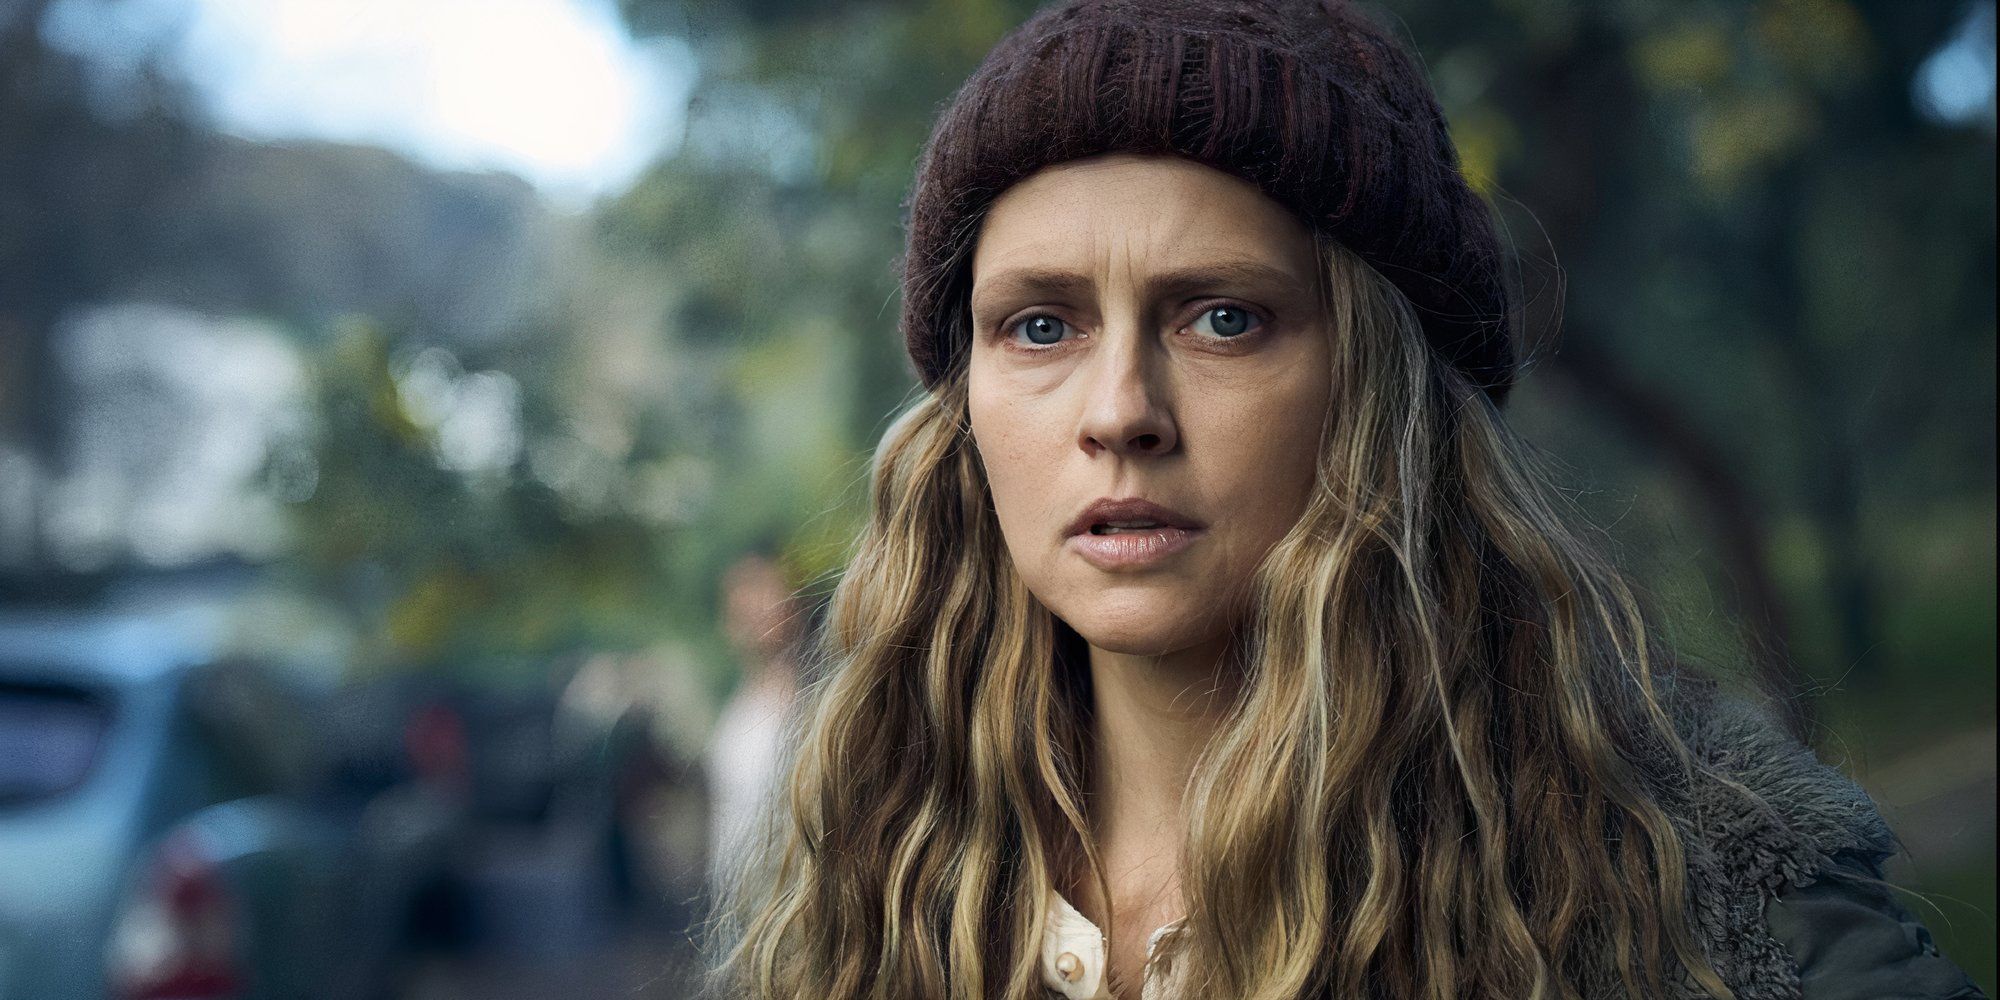 The 10 Best Teresa Palmer Movies and TV Shows, Ranked